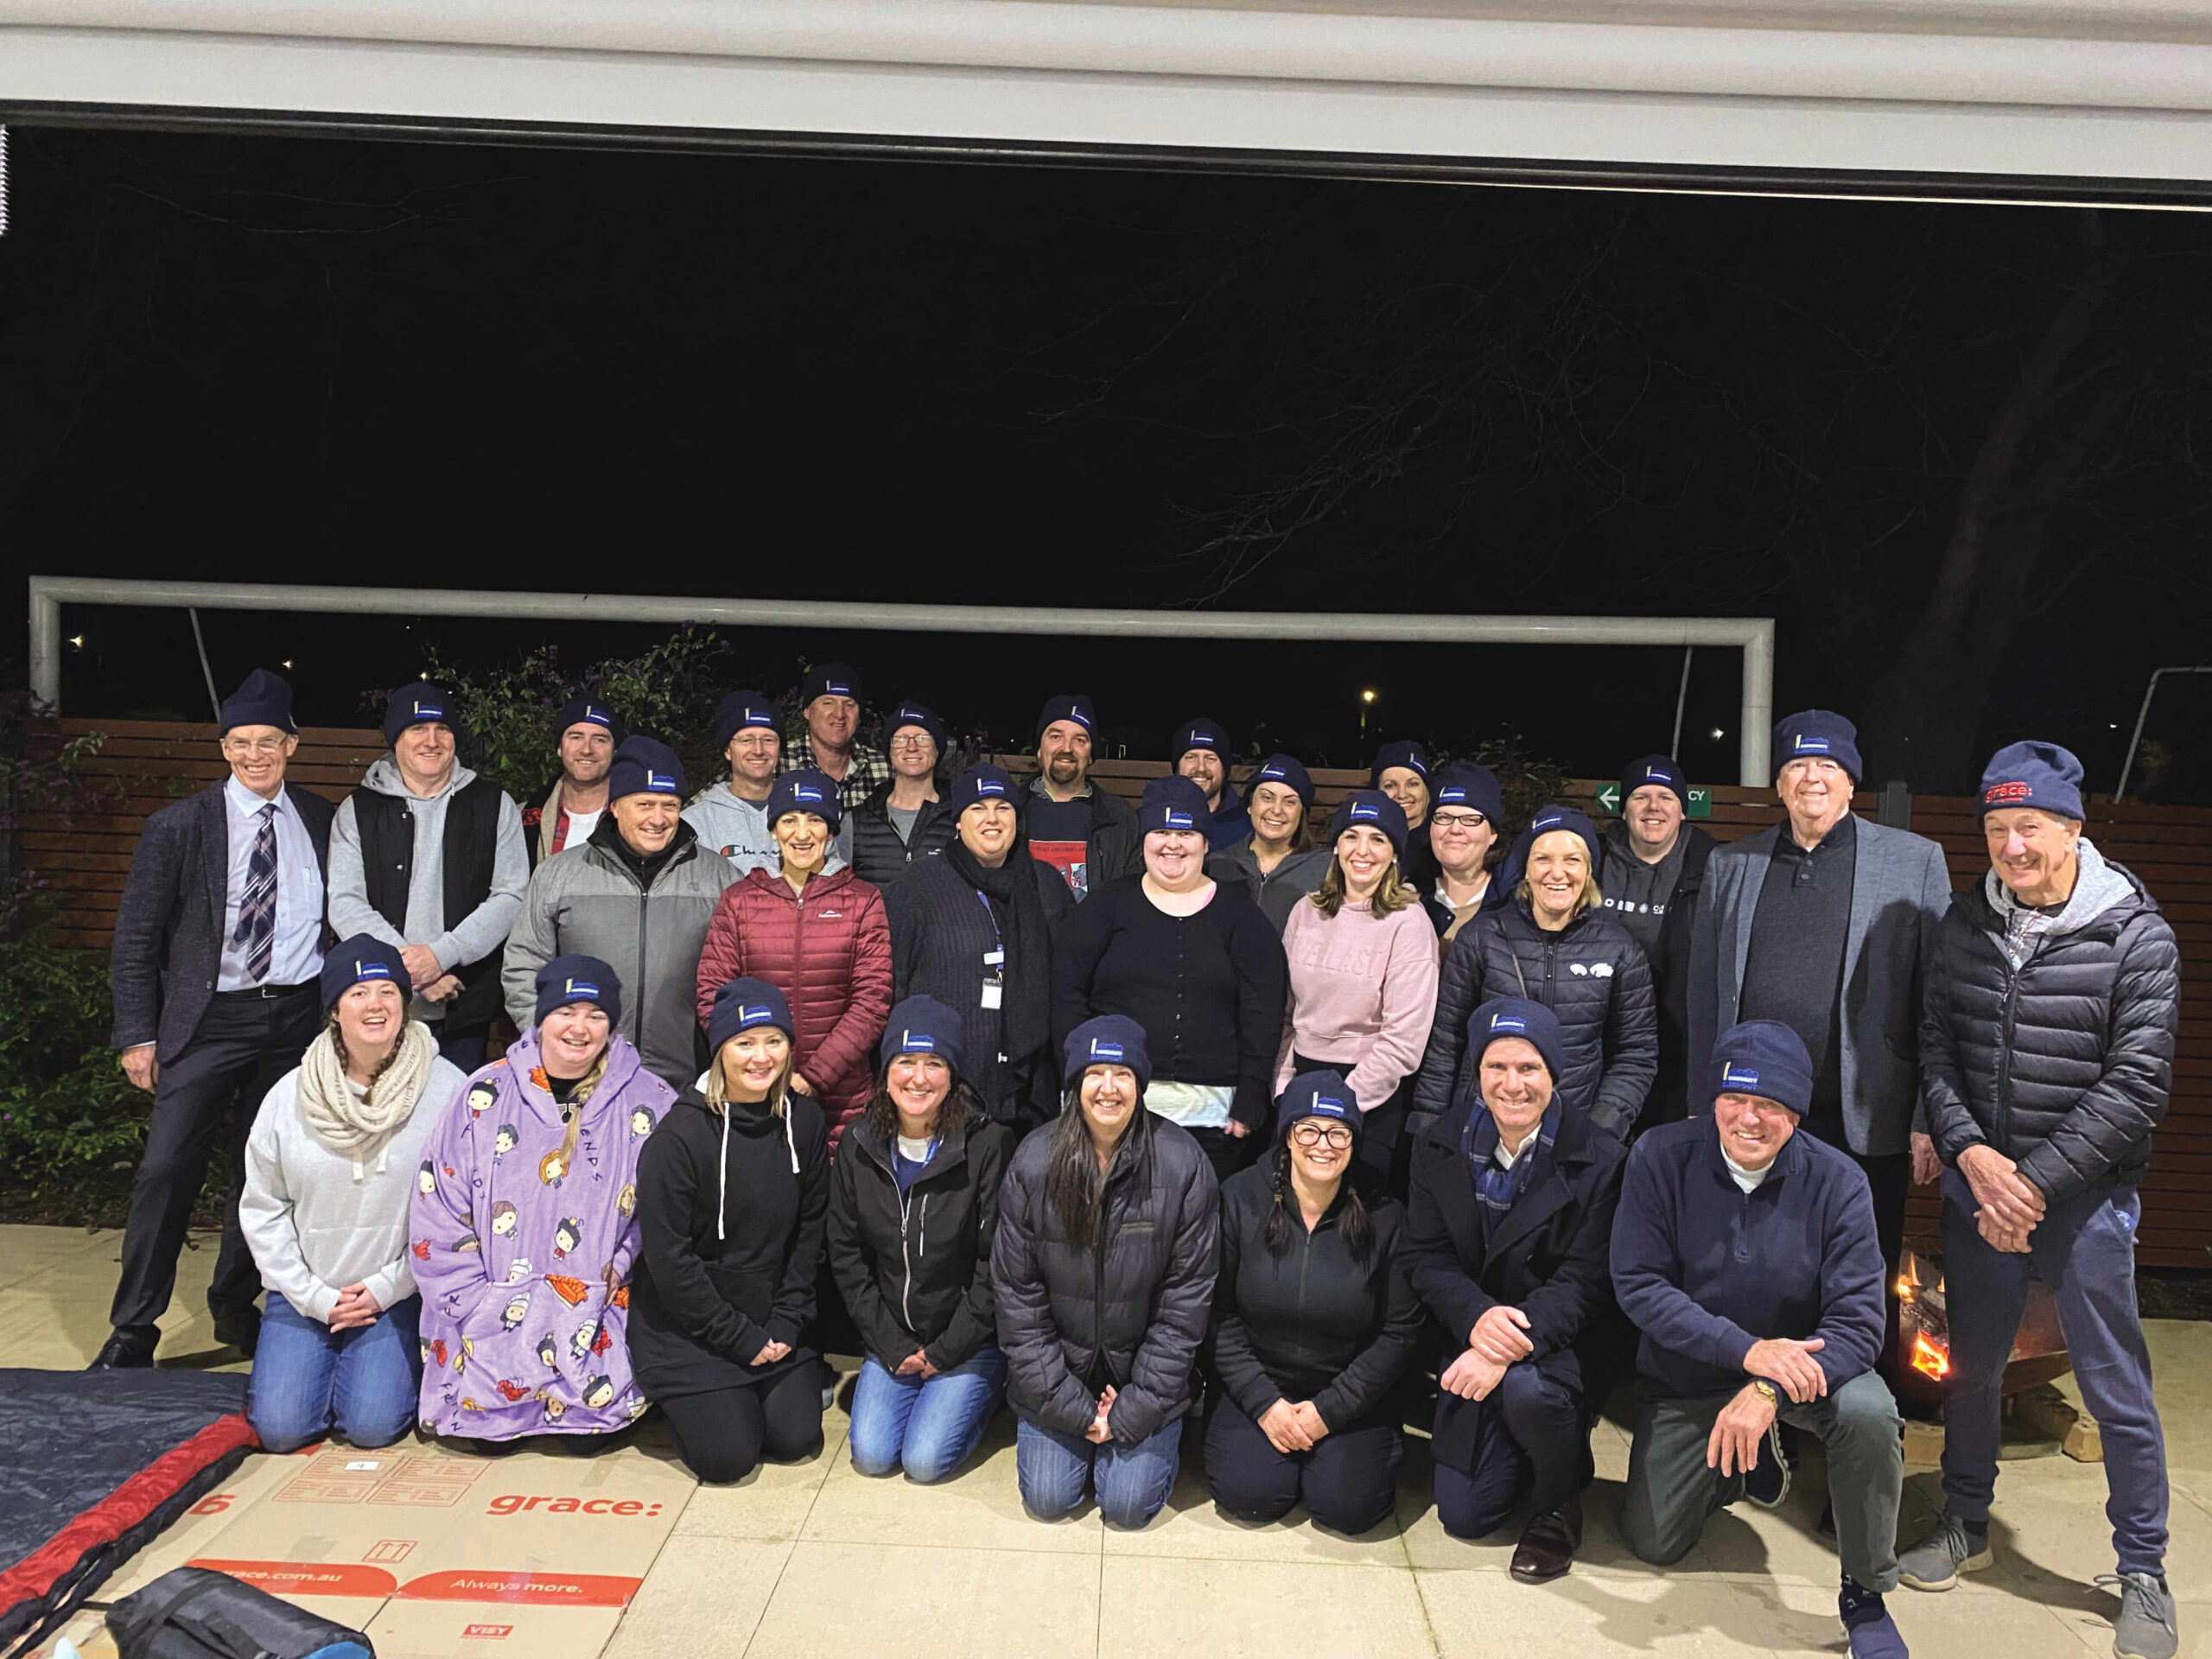 Vinnies Community Sleepout SS&A Community Support